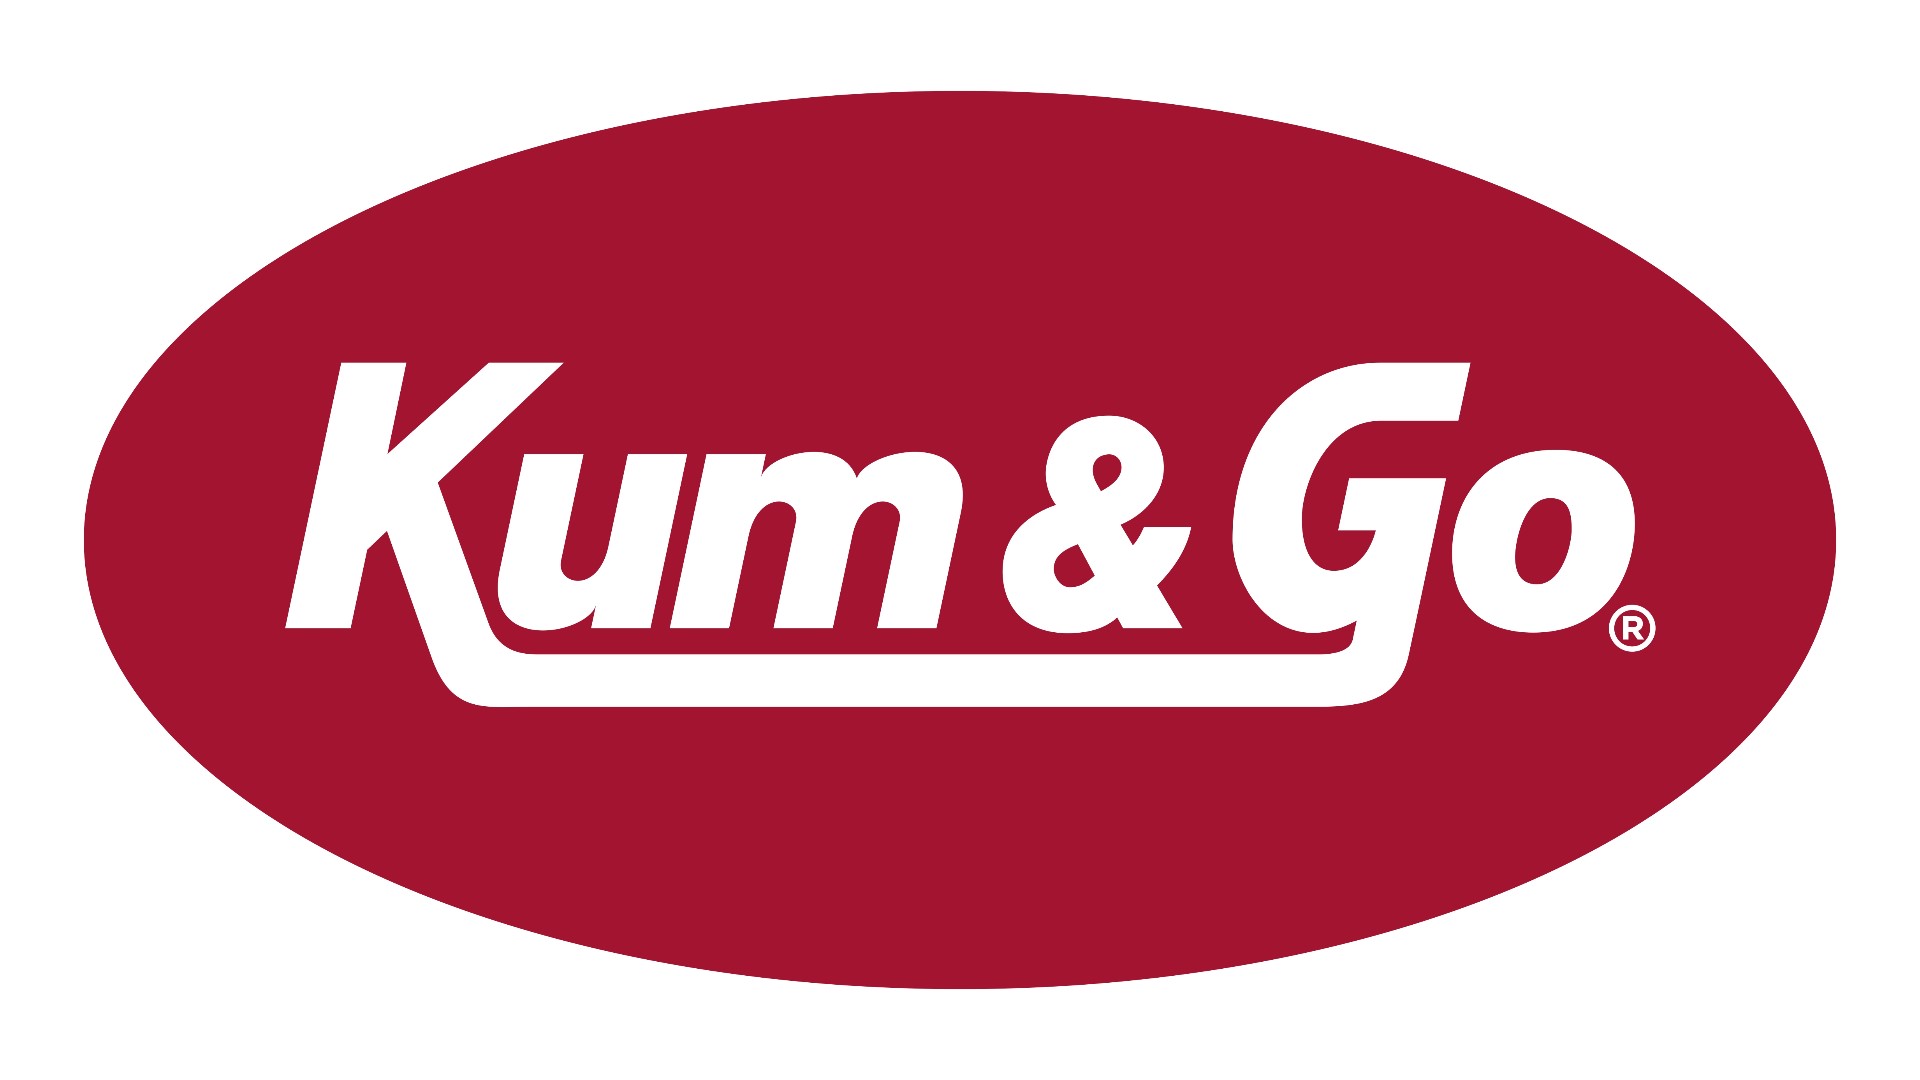 Maverik now owns Iowa-based Krause Group's Kum & Go and Solar Transport brands, allowing them to serve customers across 800 storefronts and 20 states in the U.S.